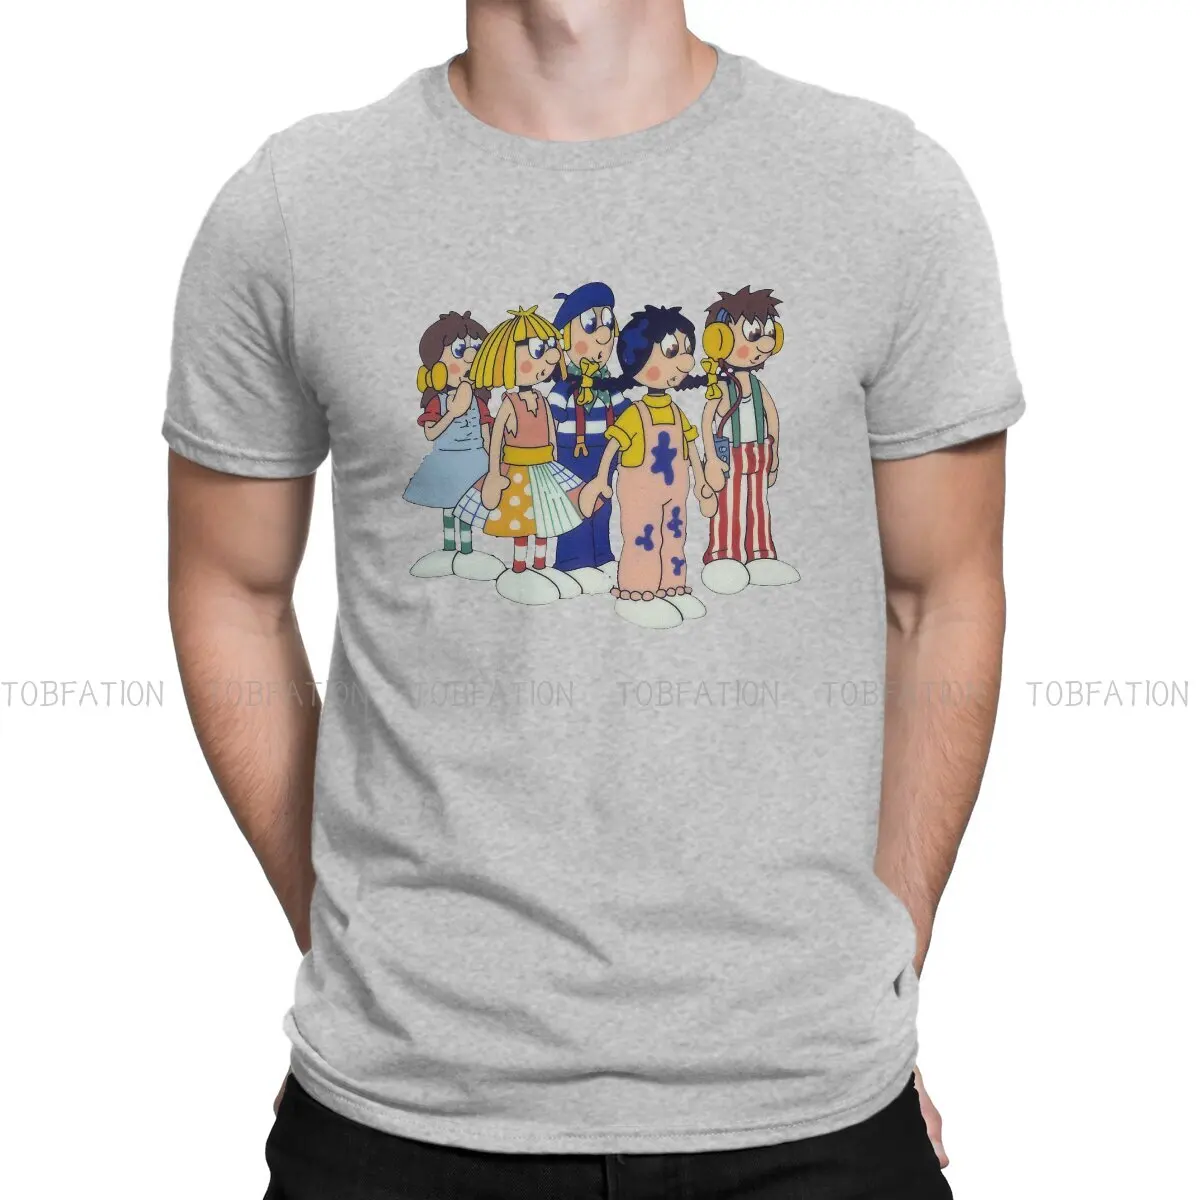 

Cool Graphic TShirt The Raggy Dolls Toys Grimes Toy Factory Style Streetwear Leisure T Shirt Male Tee Unique Gift Idea